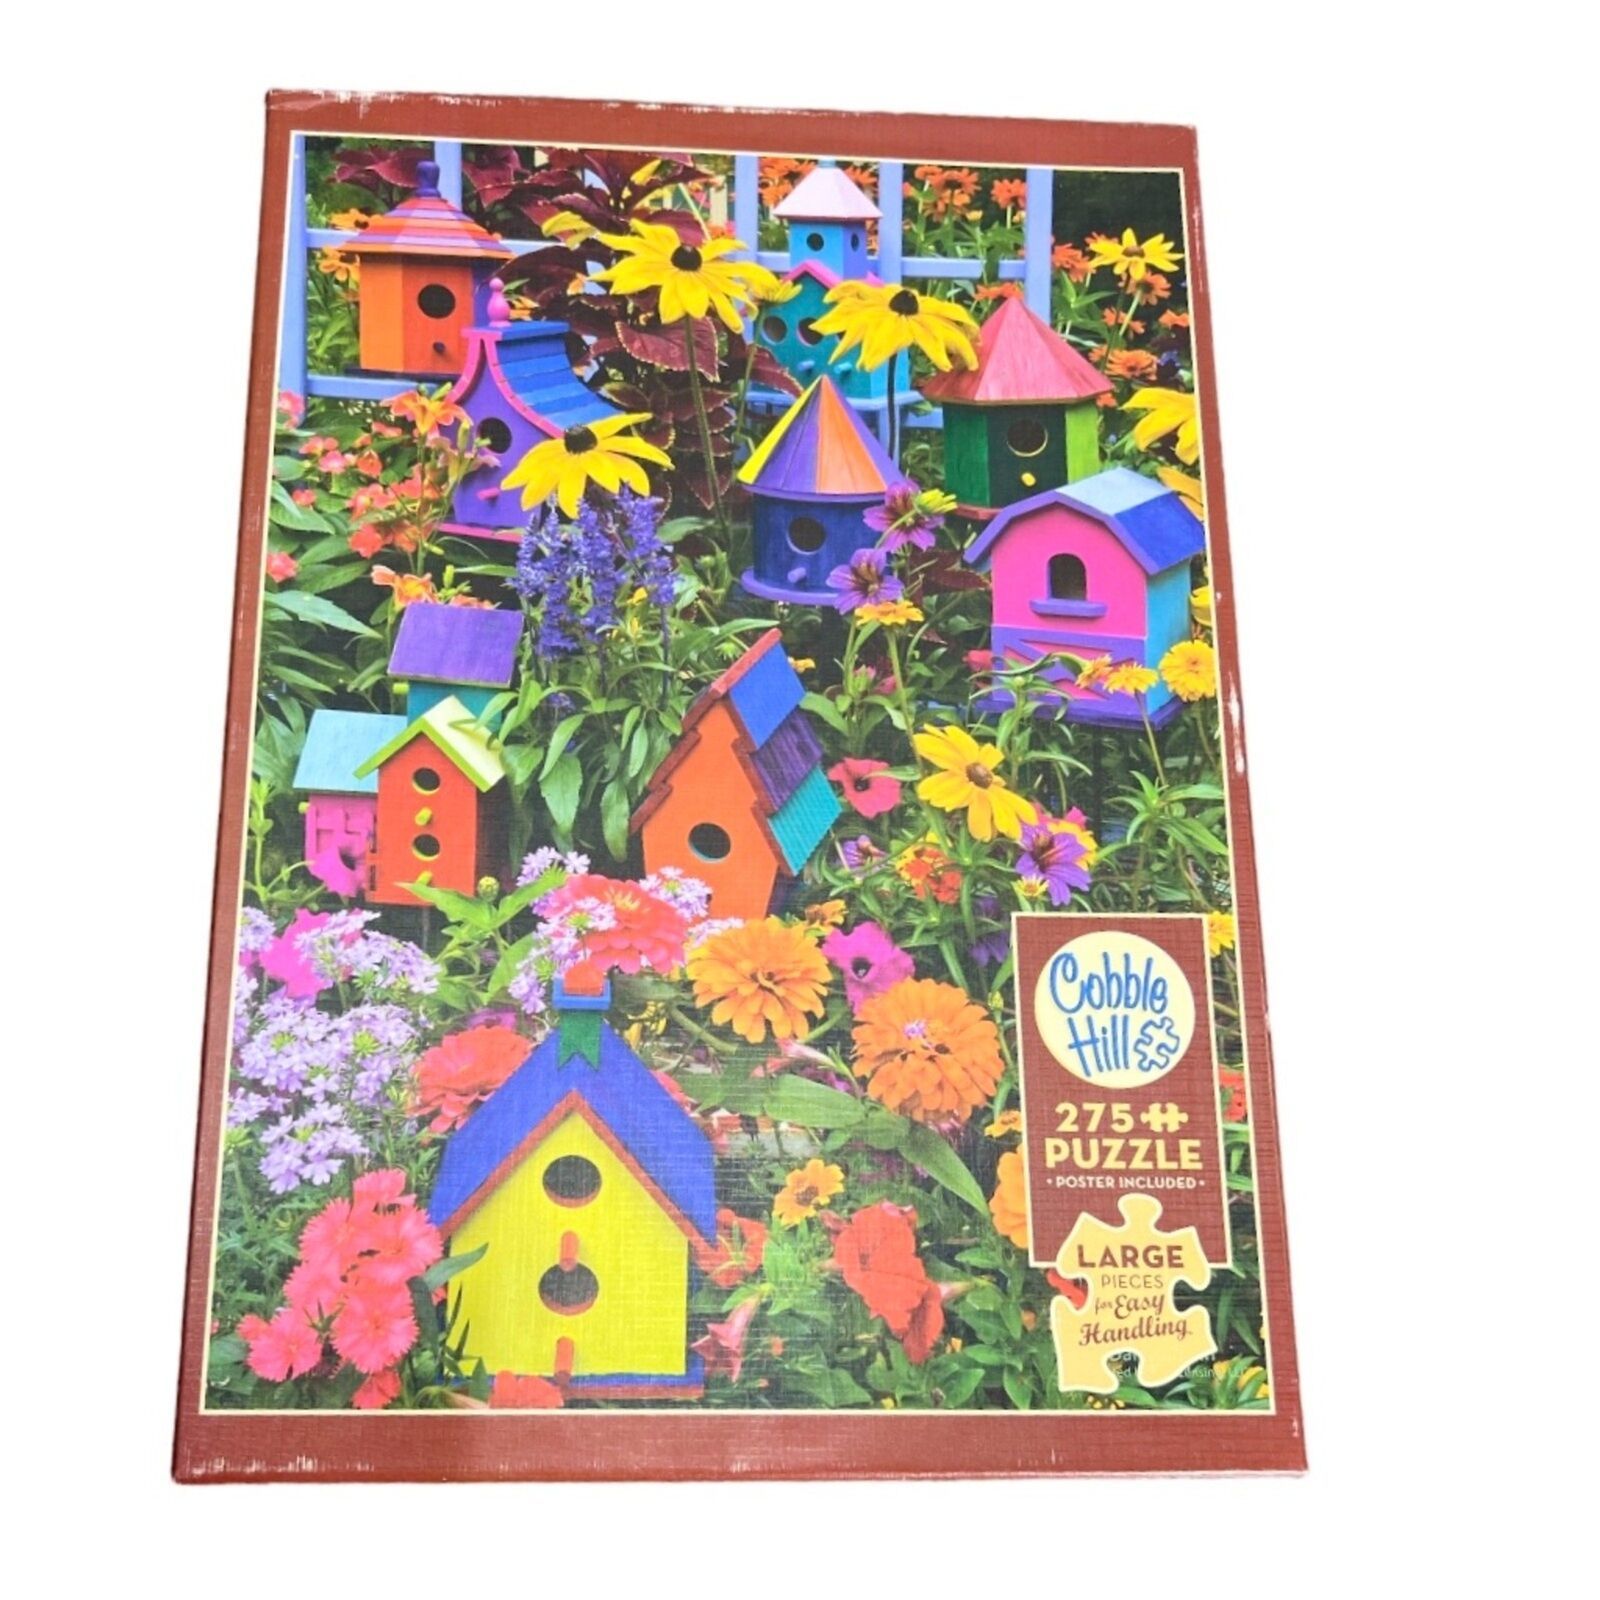 Primary image for Birdhouses Jigsaw Puzzle Large 275 pieces Cobble Hill 18" x 24"